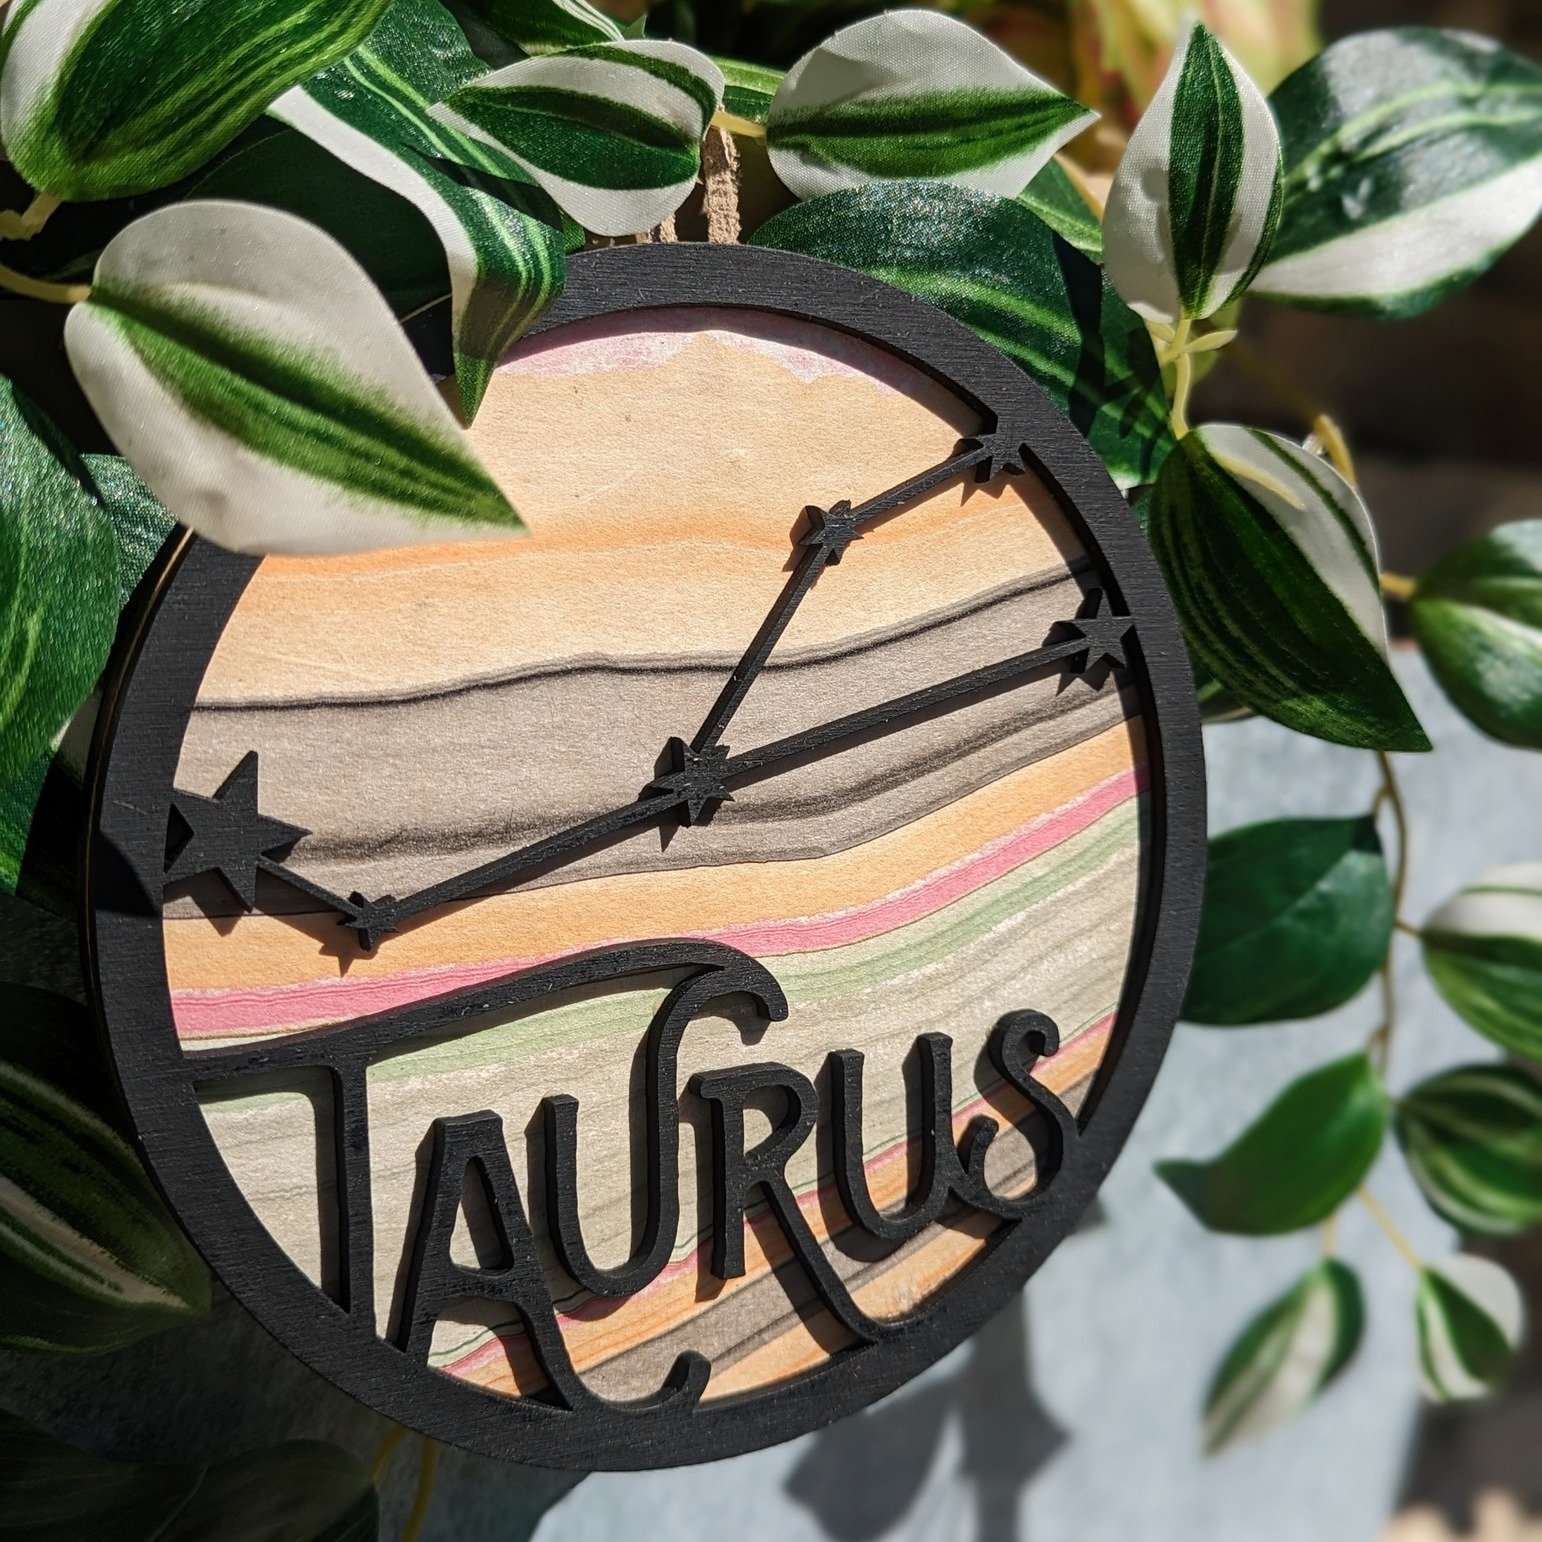 We're looking forward to some more sunshine during Taurus season. ☀️♉ This time of year focuses on being grounded in the present and enjoying the little things, like our 6in. Zodiac Circle Collection!

Shop the full collection at our link in bio.